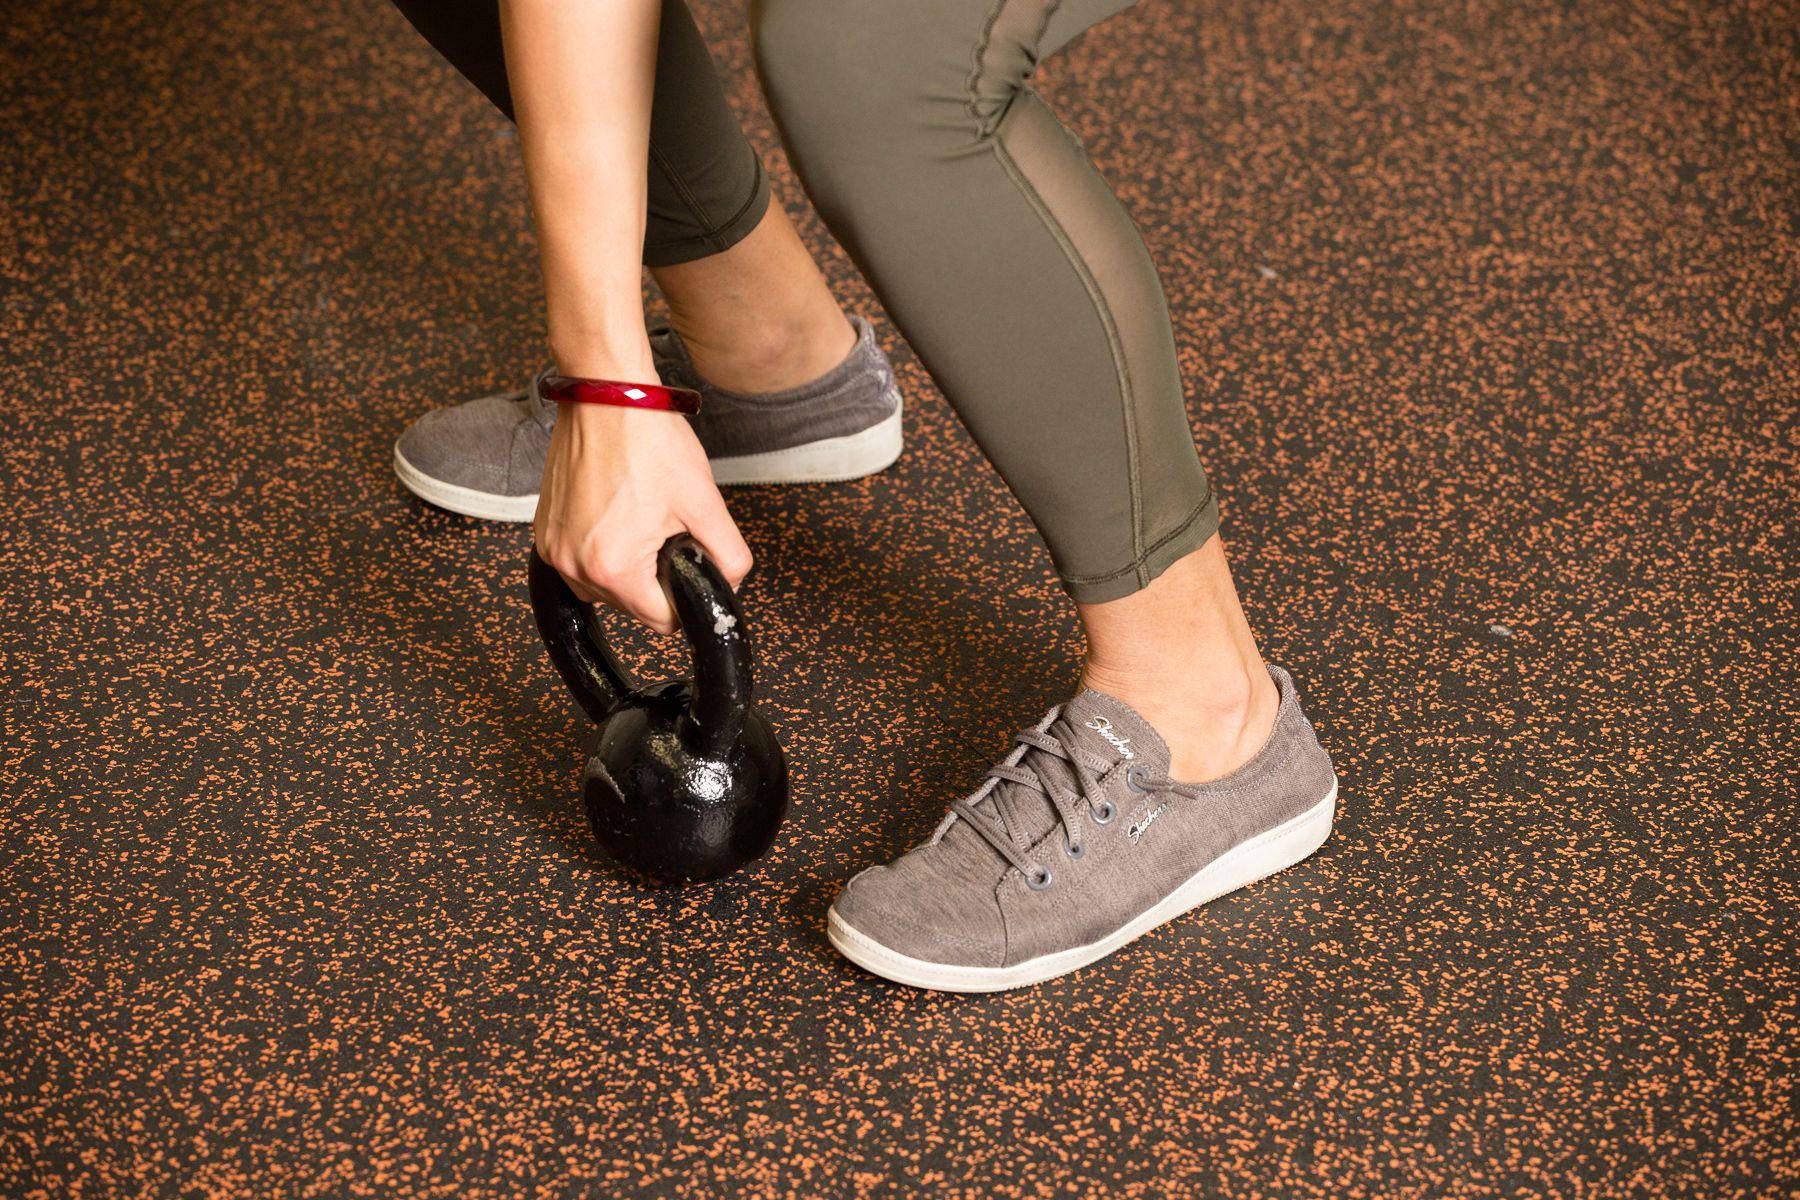 Physical exercise with Kettlebell